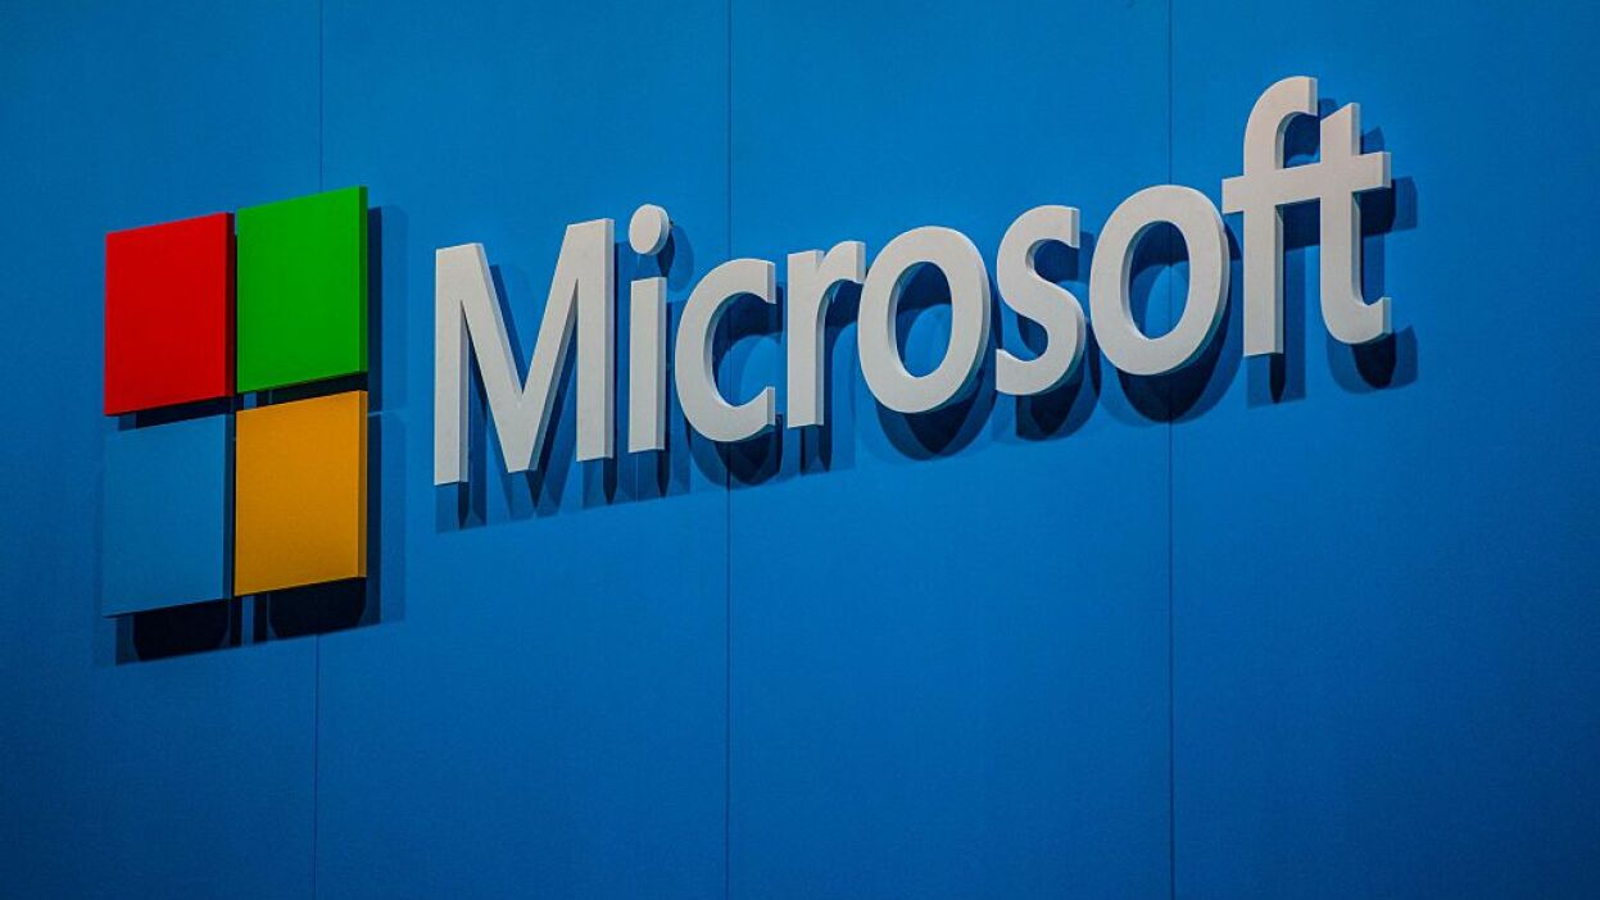 Microsoft Signs 10 Year Deal to Bring All of Its Games to